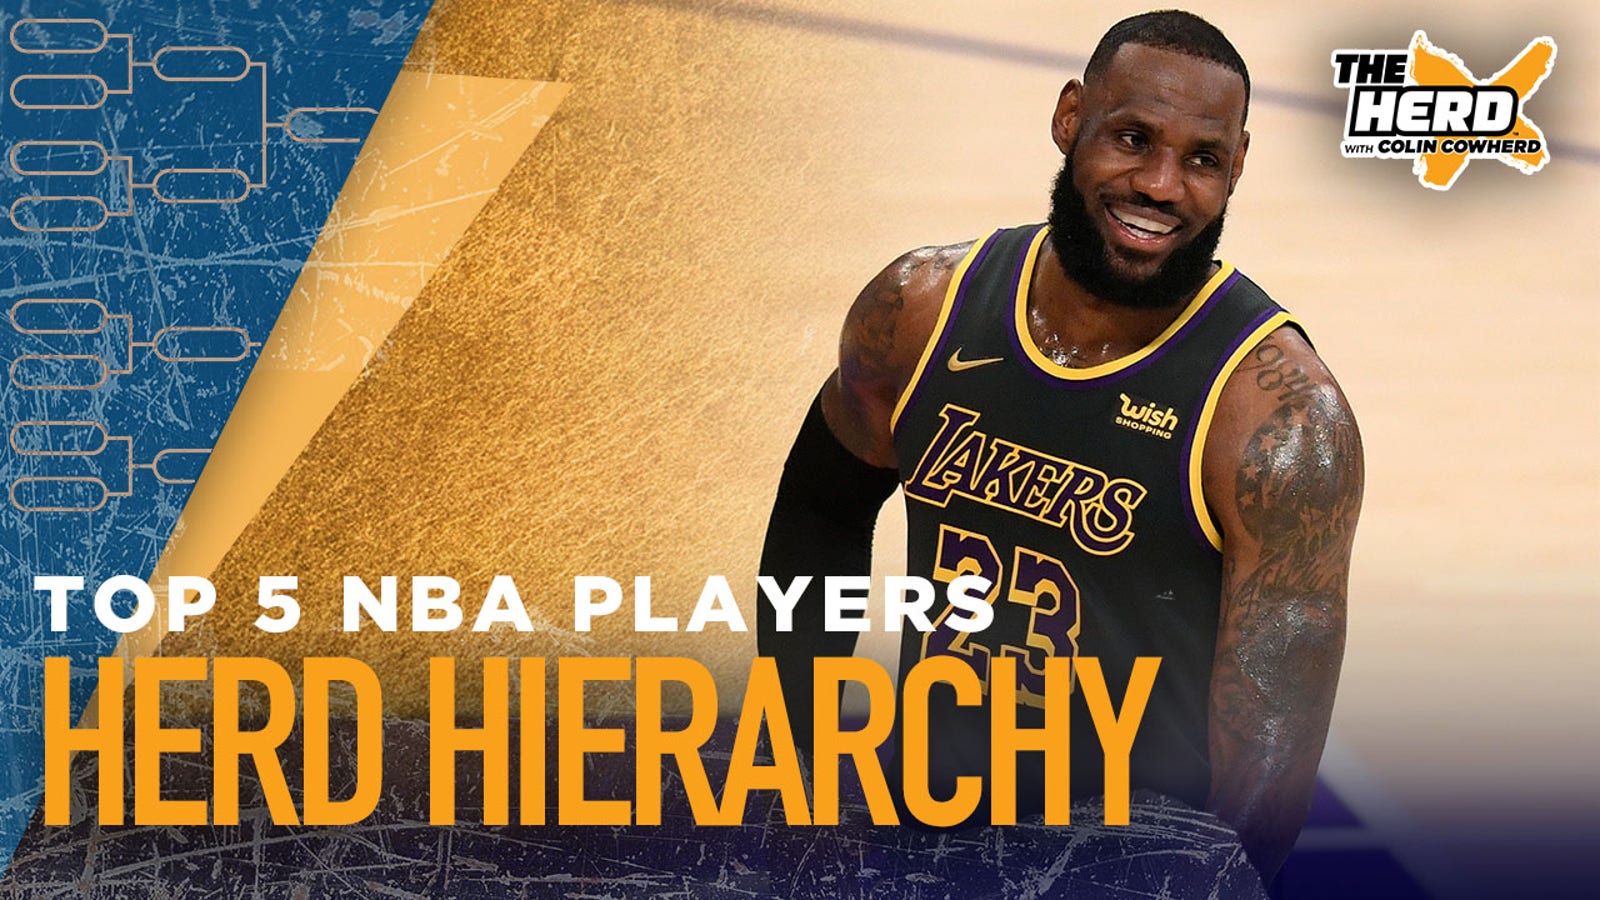 Herd Hierarchy: Colin Cowherd ranks the Top 5 NBA players he would build around | THE HERD